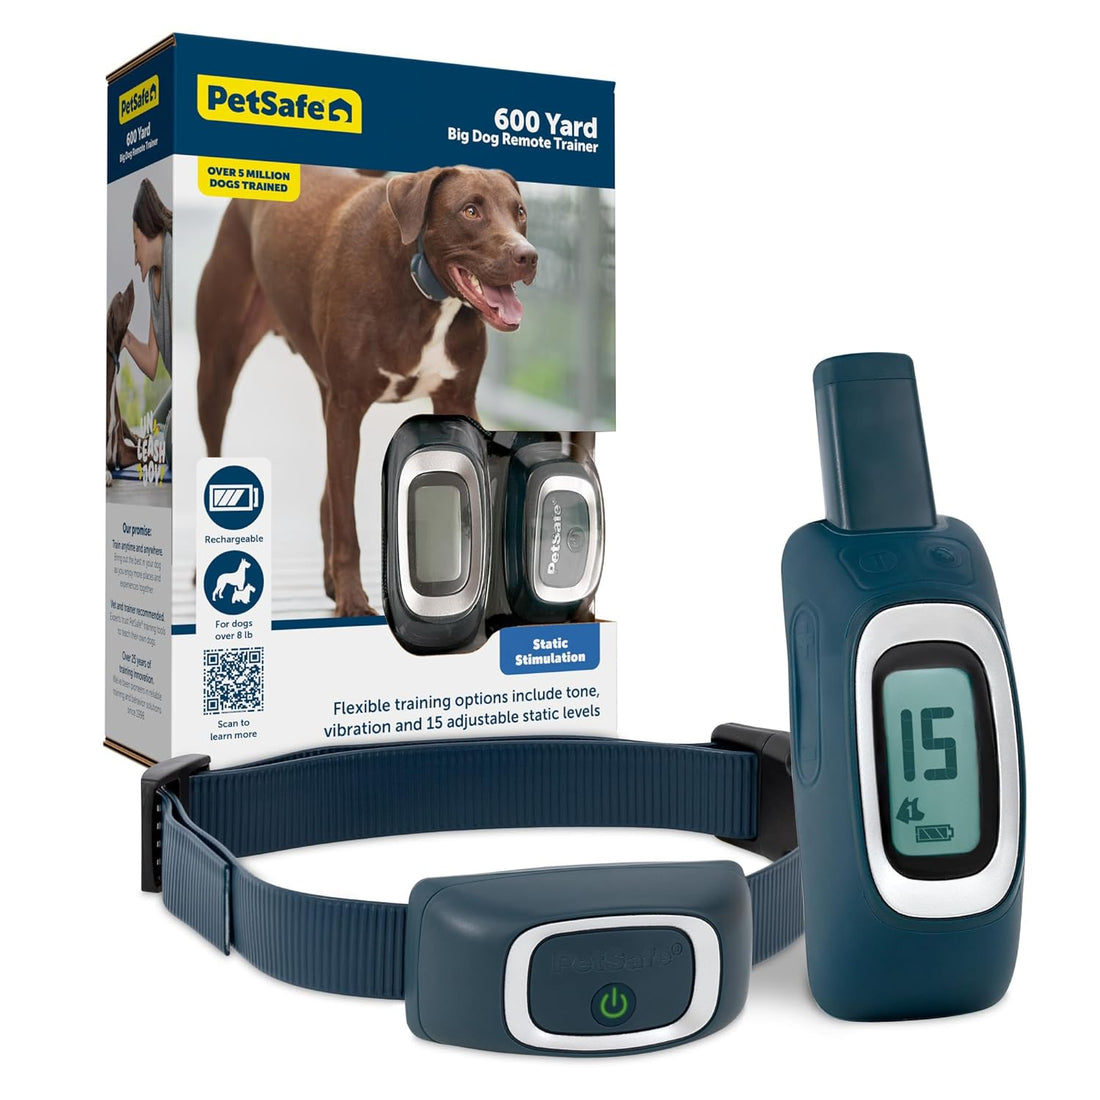 PetSafe 600 Yard Remote Trainer, Rechargeable, Waterproof, Tone/Vibration / 15 Levels of Static Stimulation for Dogs Over 8 lb